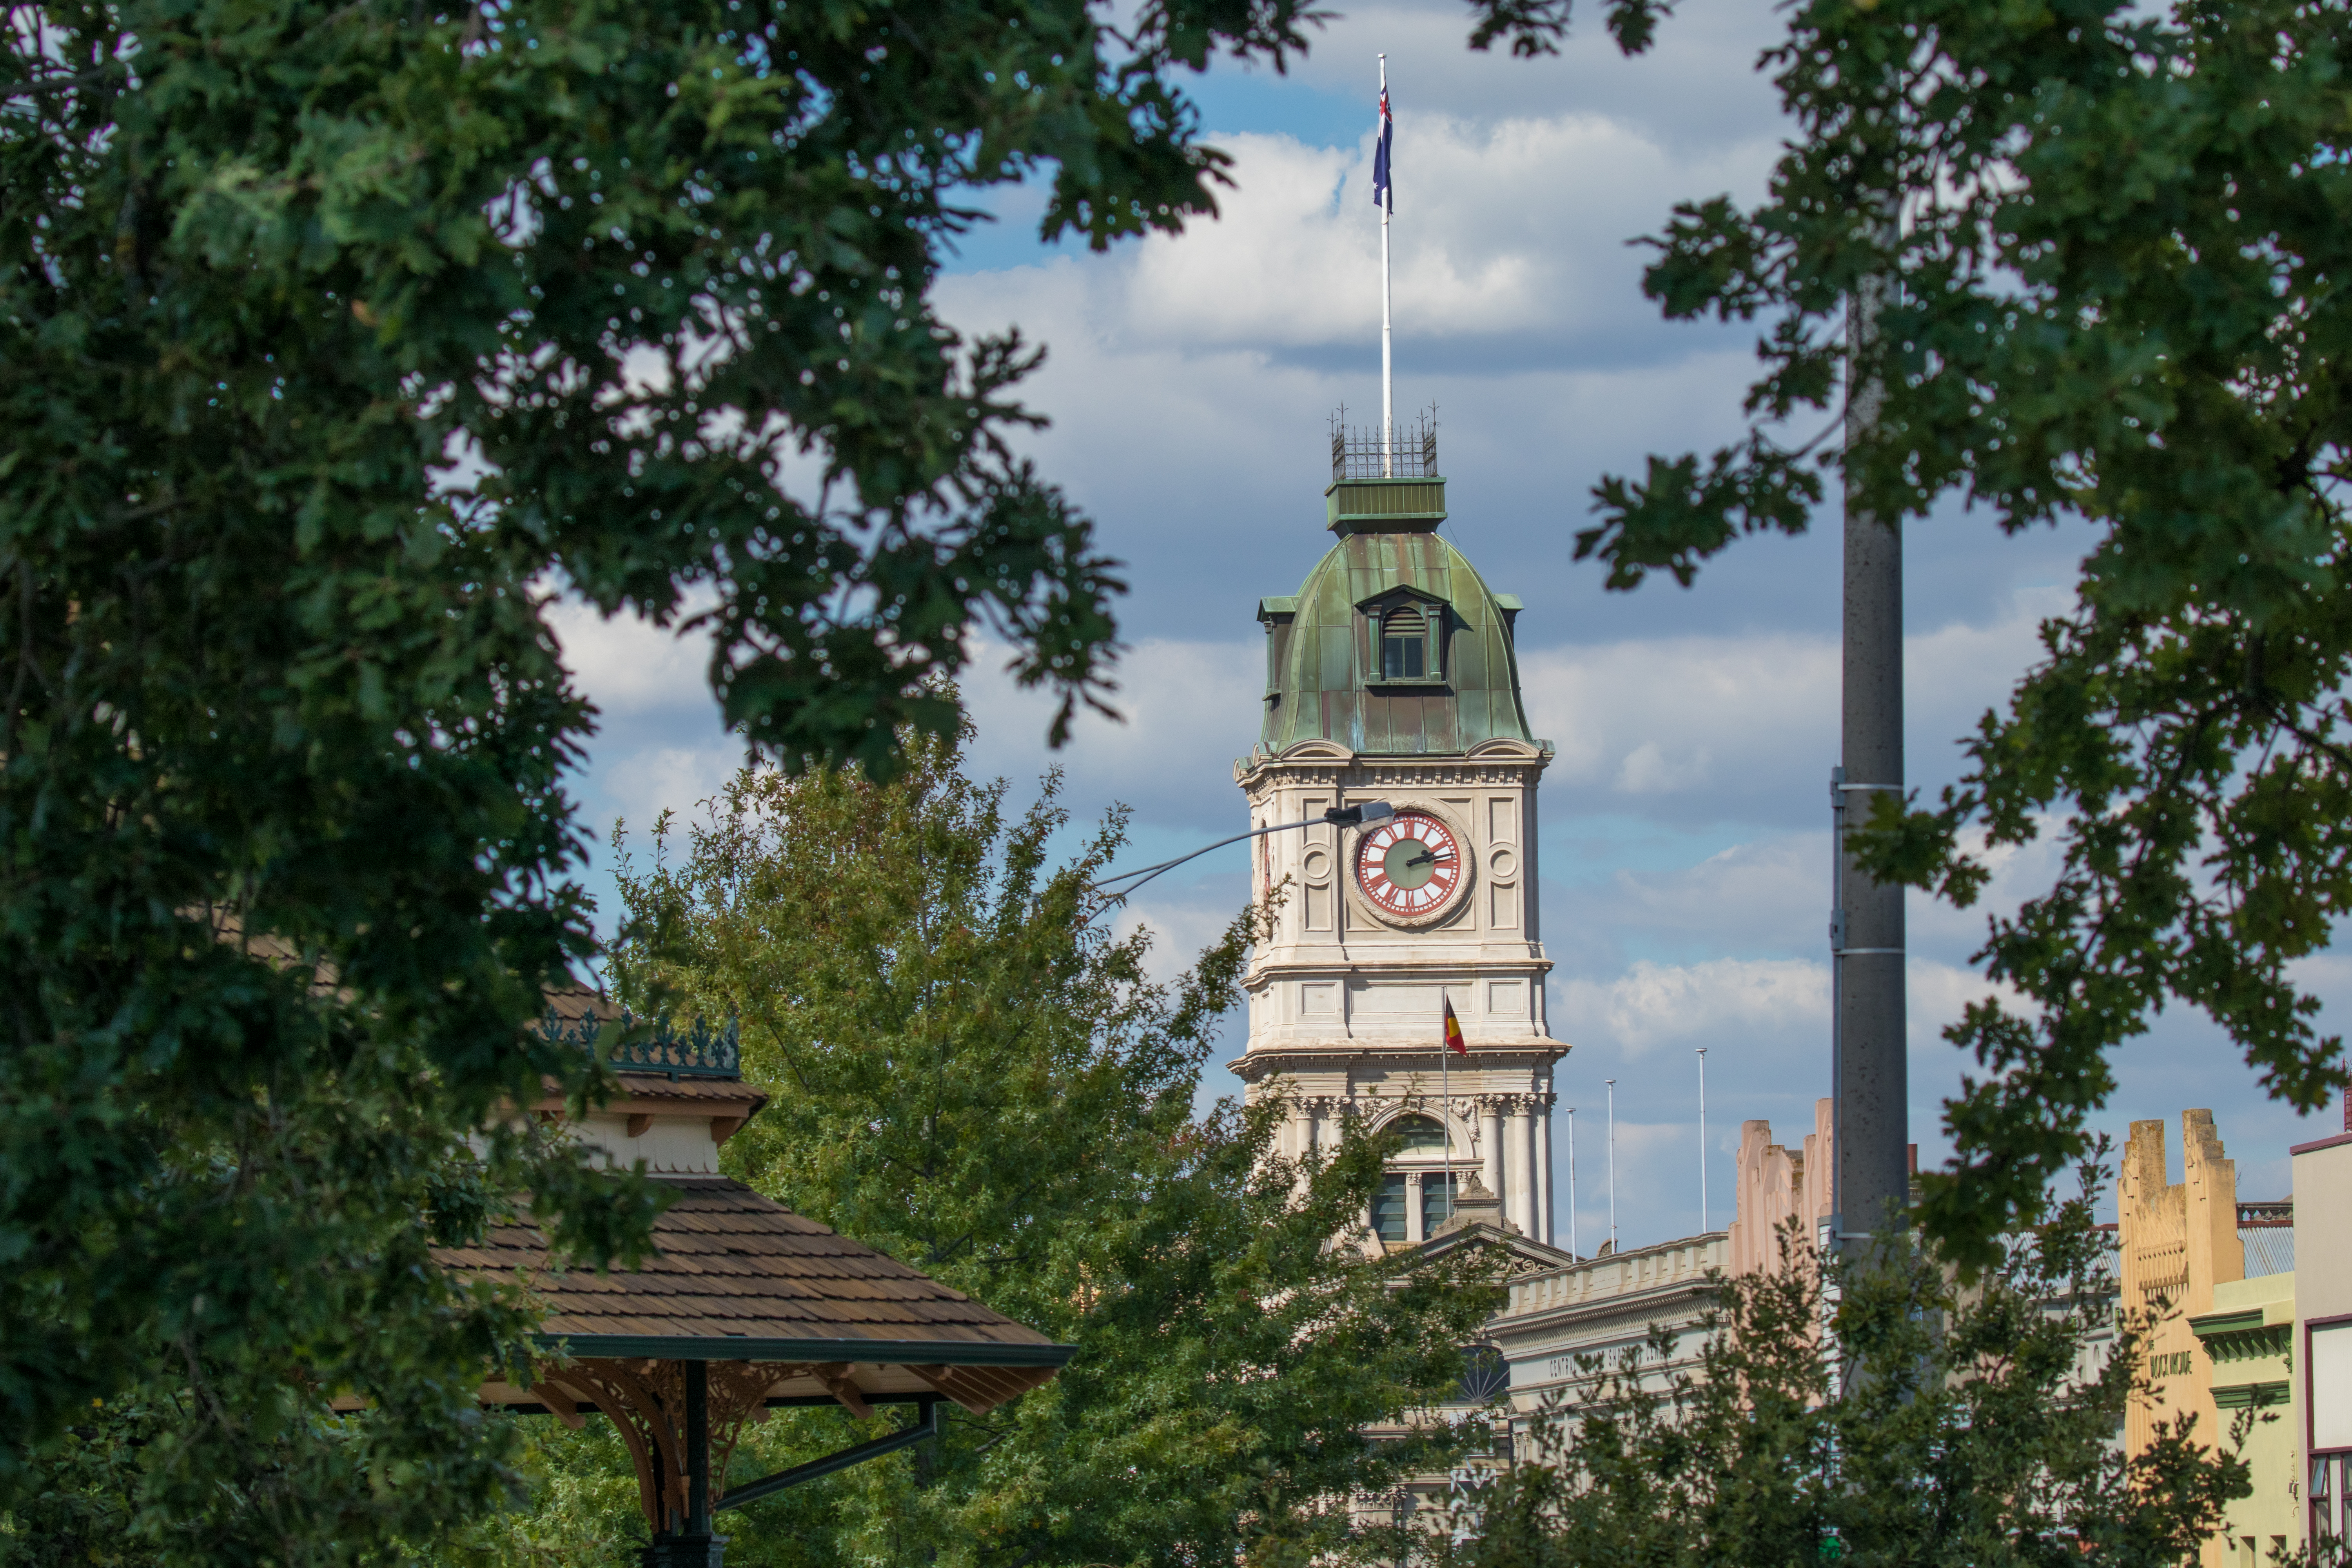 Generic photo of Town Hall in the distance with greenery